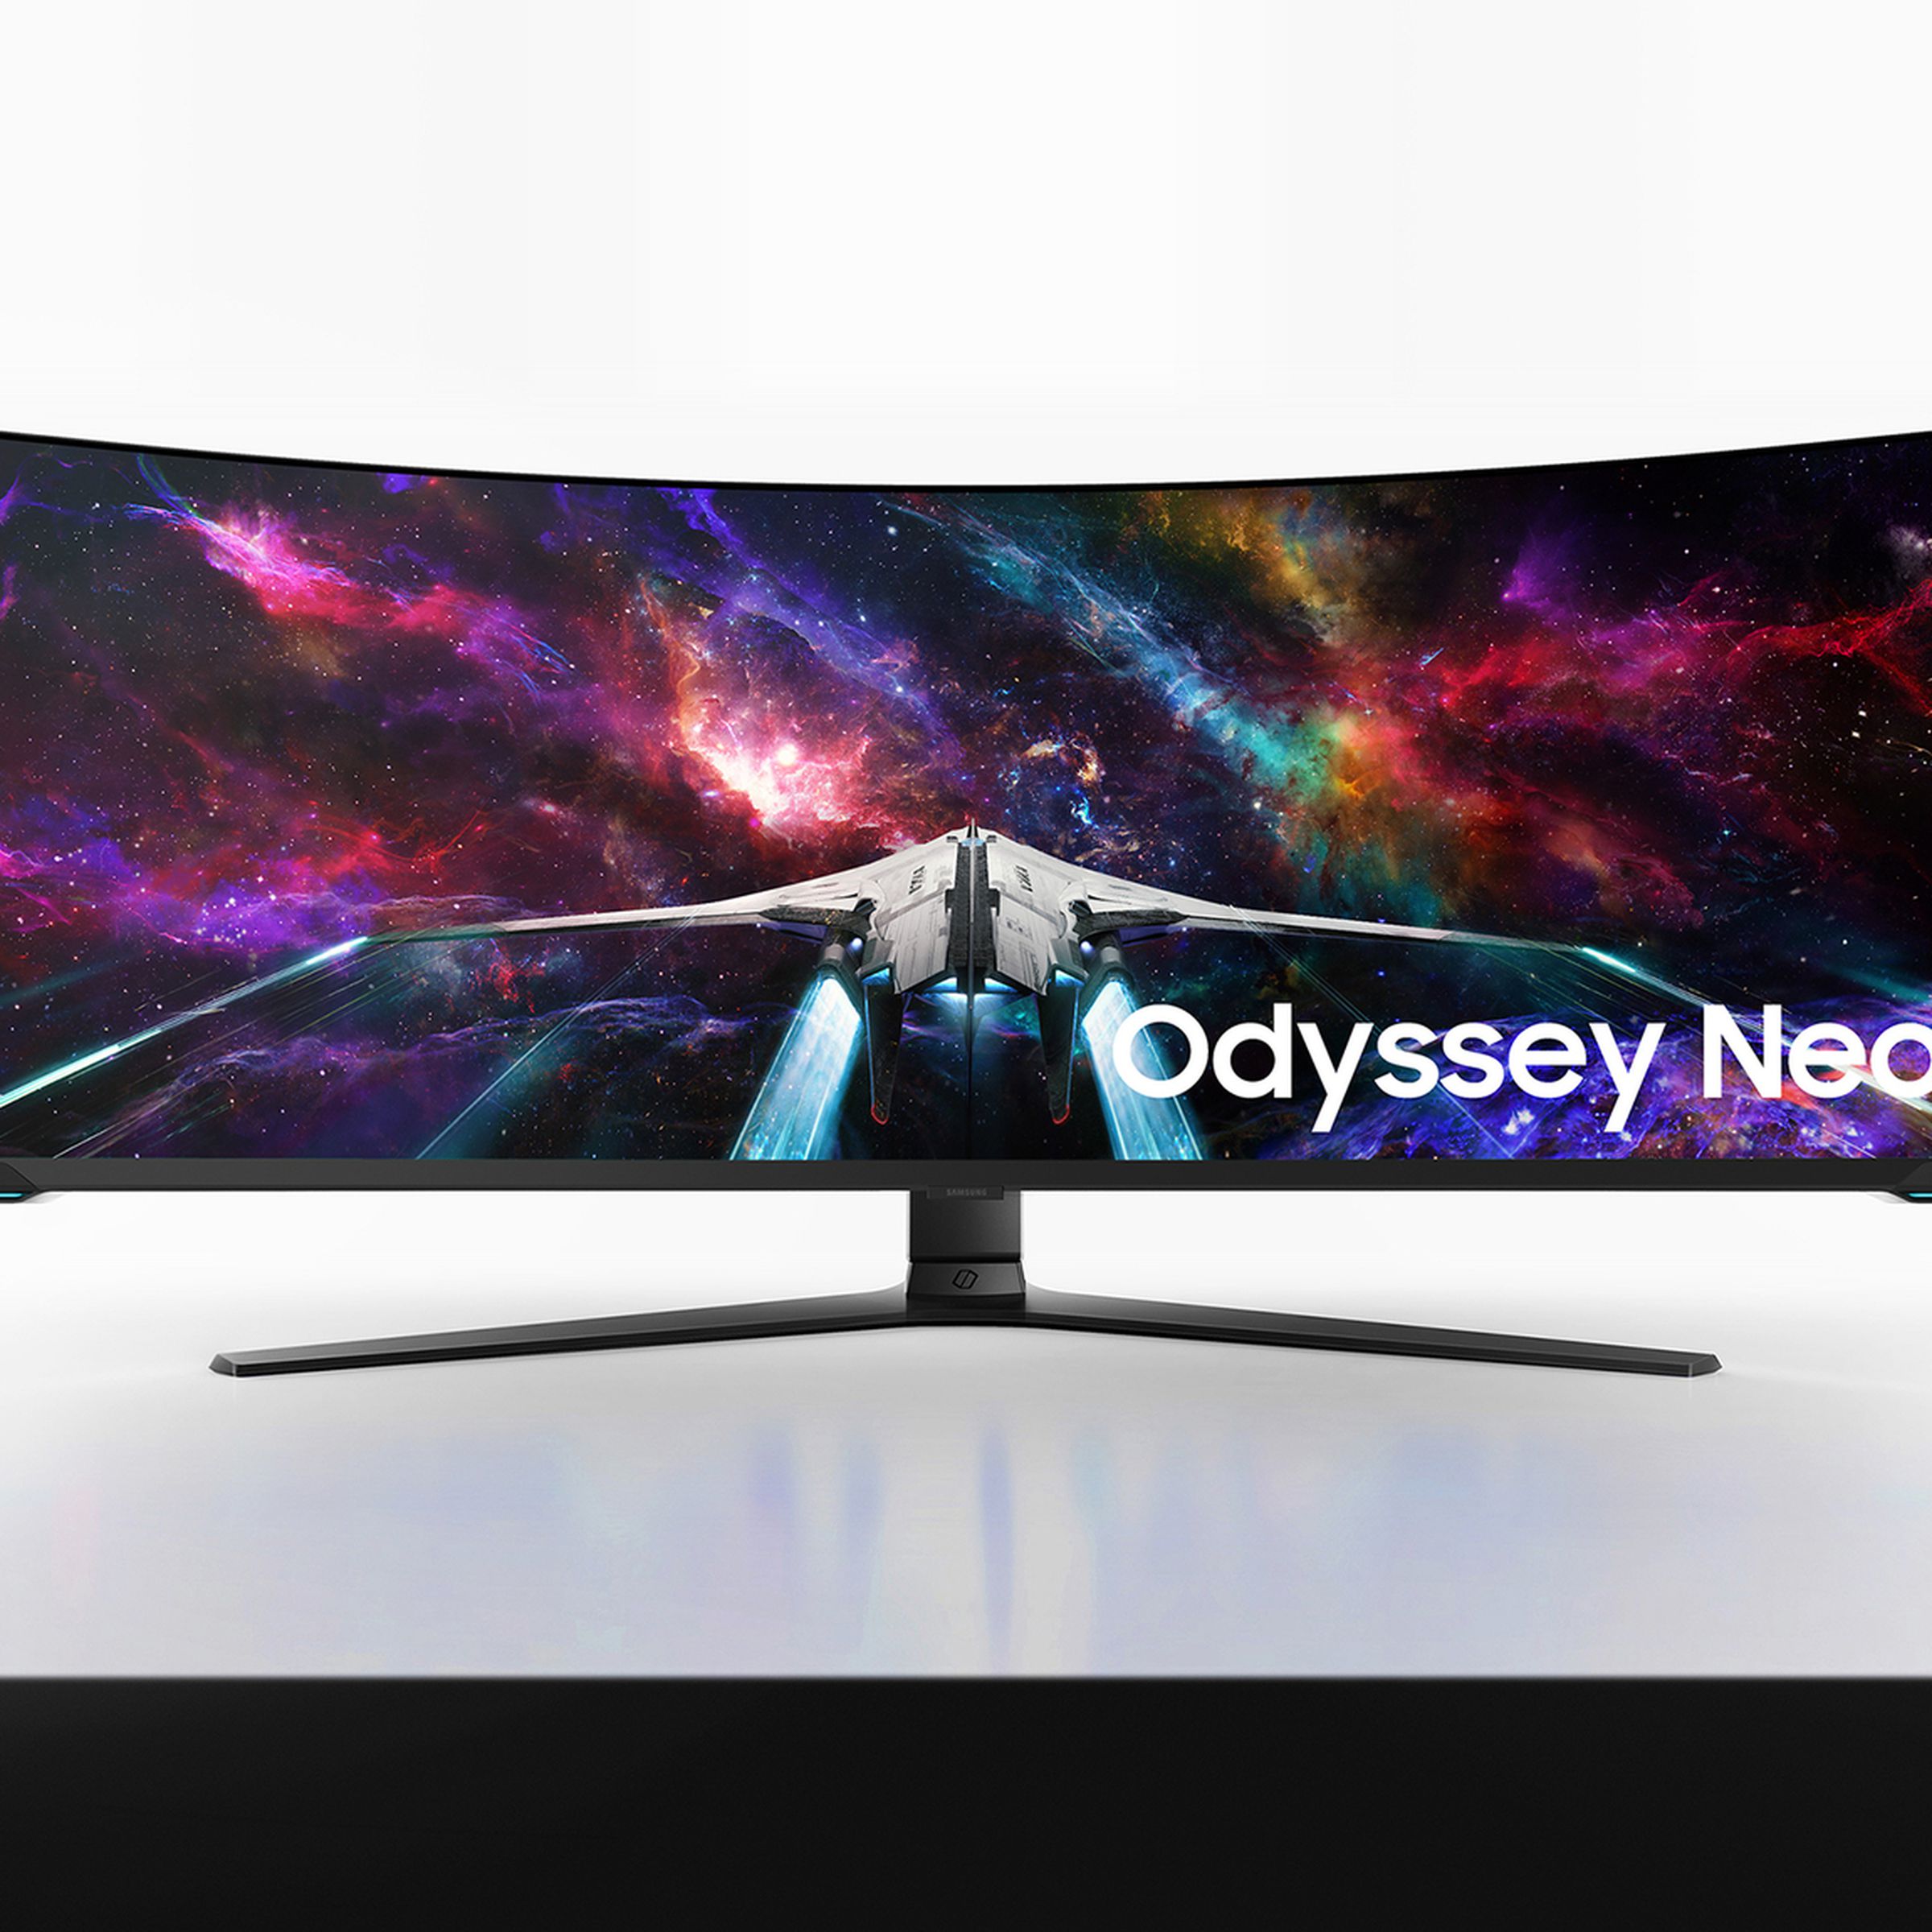 Picture of the Odyssey Neo G9.